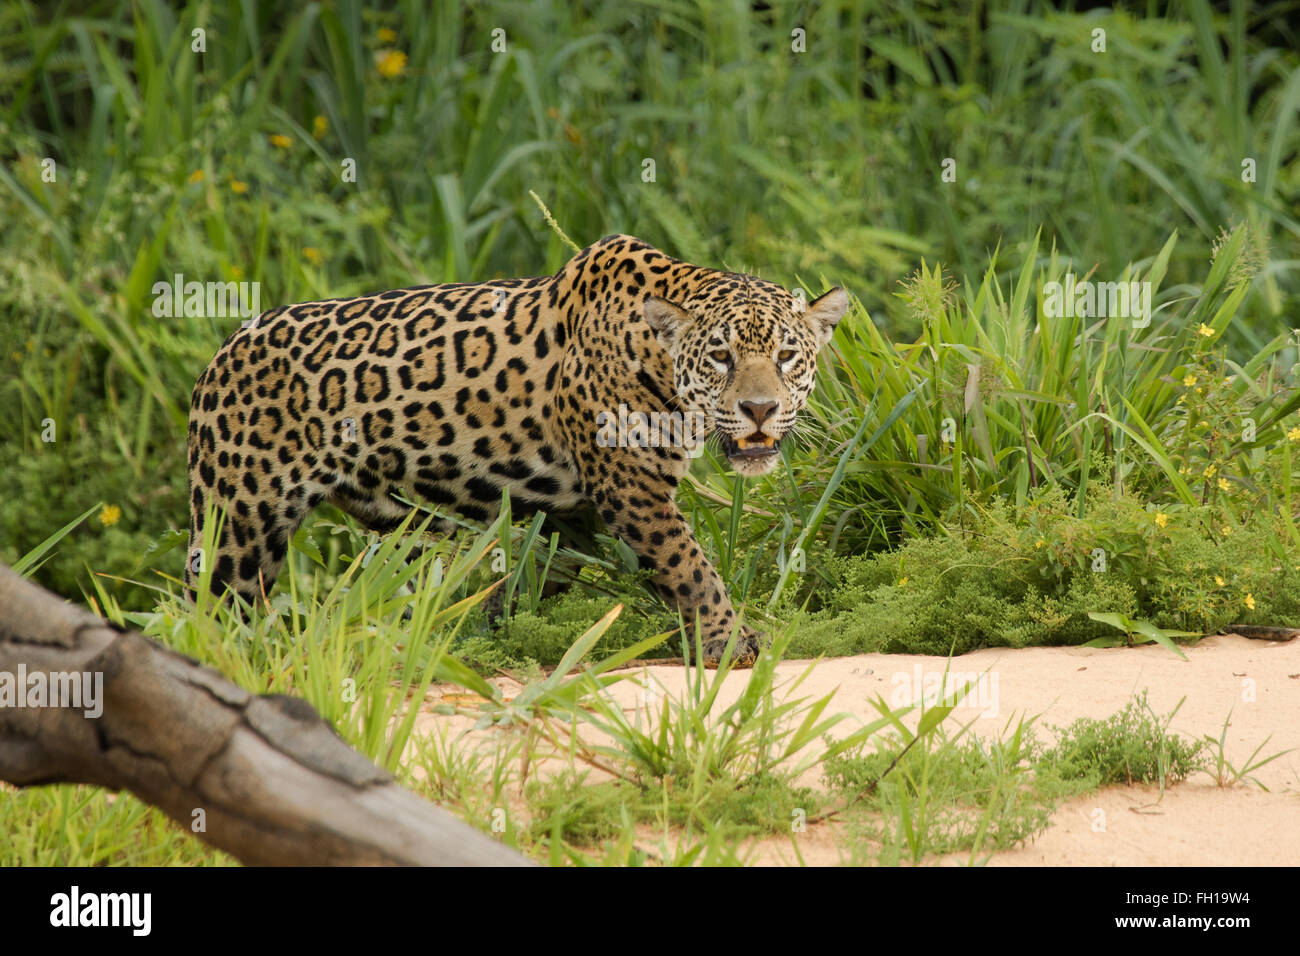 A wild sub-adult female jaguar on the banks of the Cuiaba river in the Pantanal, Brazil. Stock Photo